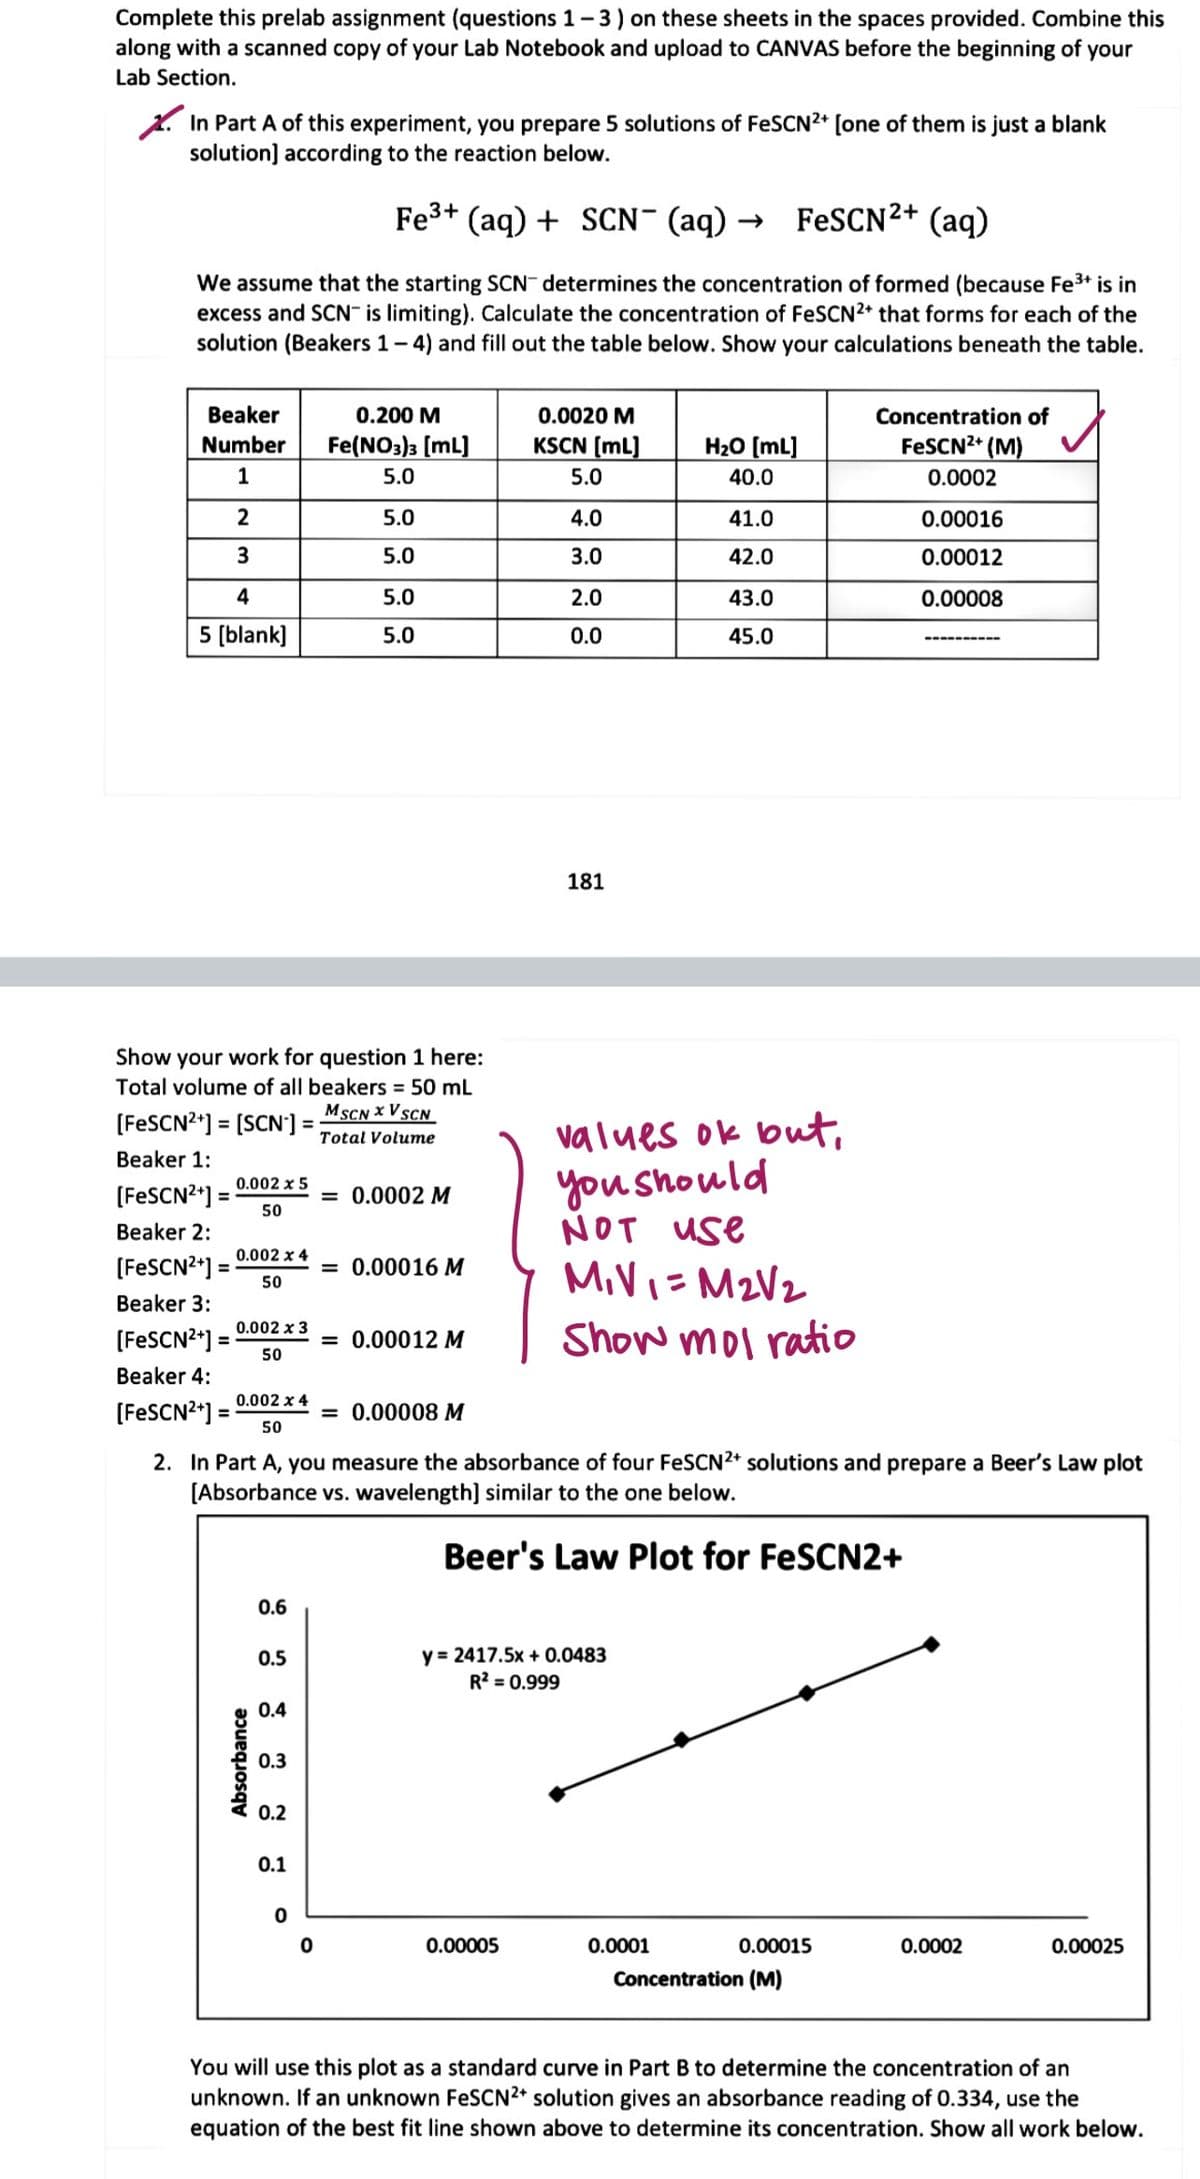 Complete this prelab assignment (questions 1-3) on these sheets in the spaces provided. Combine this
along with a scanned copy of your Lab Notebook and upload to CANVAS before the beginning of your
Lab Section.
*. In Part A of this experiment, you prepare 5 solutions of FESCN2* [one of them is just a blank
solution] according to the reaction below.
Fe3+ (aq) + SCN¯ (aq) → FeSCN²+ (aq)
We assume that the starting SCN determines the concentration of formed (because Fe3+ is in
excess and SCN" is limiting). Calculate the concentration of FESCN2* that forms for each of the
solution (Beakers 1- 4) and fill out the table below. Show your calculations beneath the table.
Beaker
0.200 M
0.0020 M
Concentration of
Number
Fe(NO3)3 (mL]
KSCN (mL]
H20 [mL]
FESCN2* (M)
1
5.0
5.0
40.0
0.0002
2
5.0
4.0
41.0
0.00016
5.0
3.0
42.0
0.00012
4
5.0
2.0
43.0
0.00008
5 (blank)
5.0
0.0
45.0
181
Show your work for question 1 here:
Total volume of all beakers = 50 mL
MSCN x VSCN
(FESCN2*] = (SCN'] =
values ok but,
you Should
NOT use
Total Volume
Beaker 1:
0.002 x 5
(FESCN2"] =
50
= 0.0002 M
%3D
Beaker 2:
0.002 x 4
(FESCN²*] =
50
= 0.00016 M
MiVi=M2V2
Beaker 3:
Show mol ratio
0.002 x 3
(FESCN2*] =
50
= 0.00012 M
Beaker 4:
0.002 x 4
(FESCN2"] =
50
= 0.00008 M
2. In Part A, you measure the absorbance of four FeSCN2* solutions and prepare a Beer's Law plot
(Absorbance vs. wavelength] similar to the one below.
Beer's Law Plot for FeSCN2+
0.6
y = 2417.5x + 0.0483
R? = 0.999
0.5
E
0.4
0.3
0.2
0.1
0.00005
0.0001
0.00015
0.0002
0.00025
Concentration (M)
You will use this plot as a standard curve in Part B to determine the concentration of an
unknown. If an unknown FeSCN2* solution gives an absorbance reading of 0.334, use the
equation of the best fit line shown above to determine its concentration. Show all work below.
Absorbance
